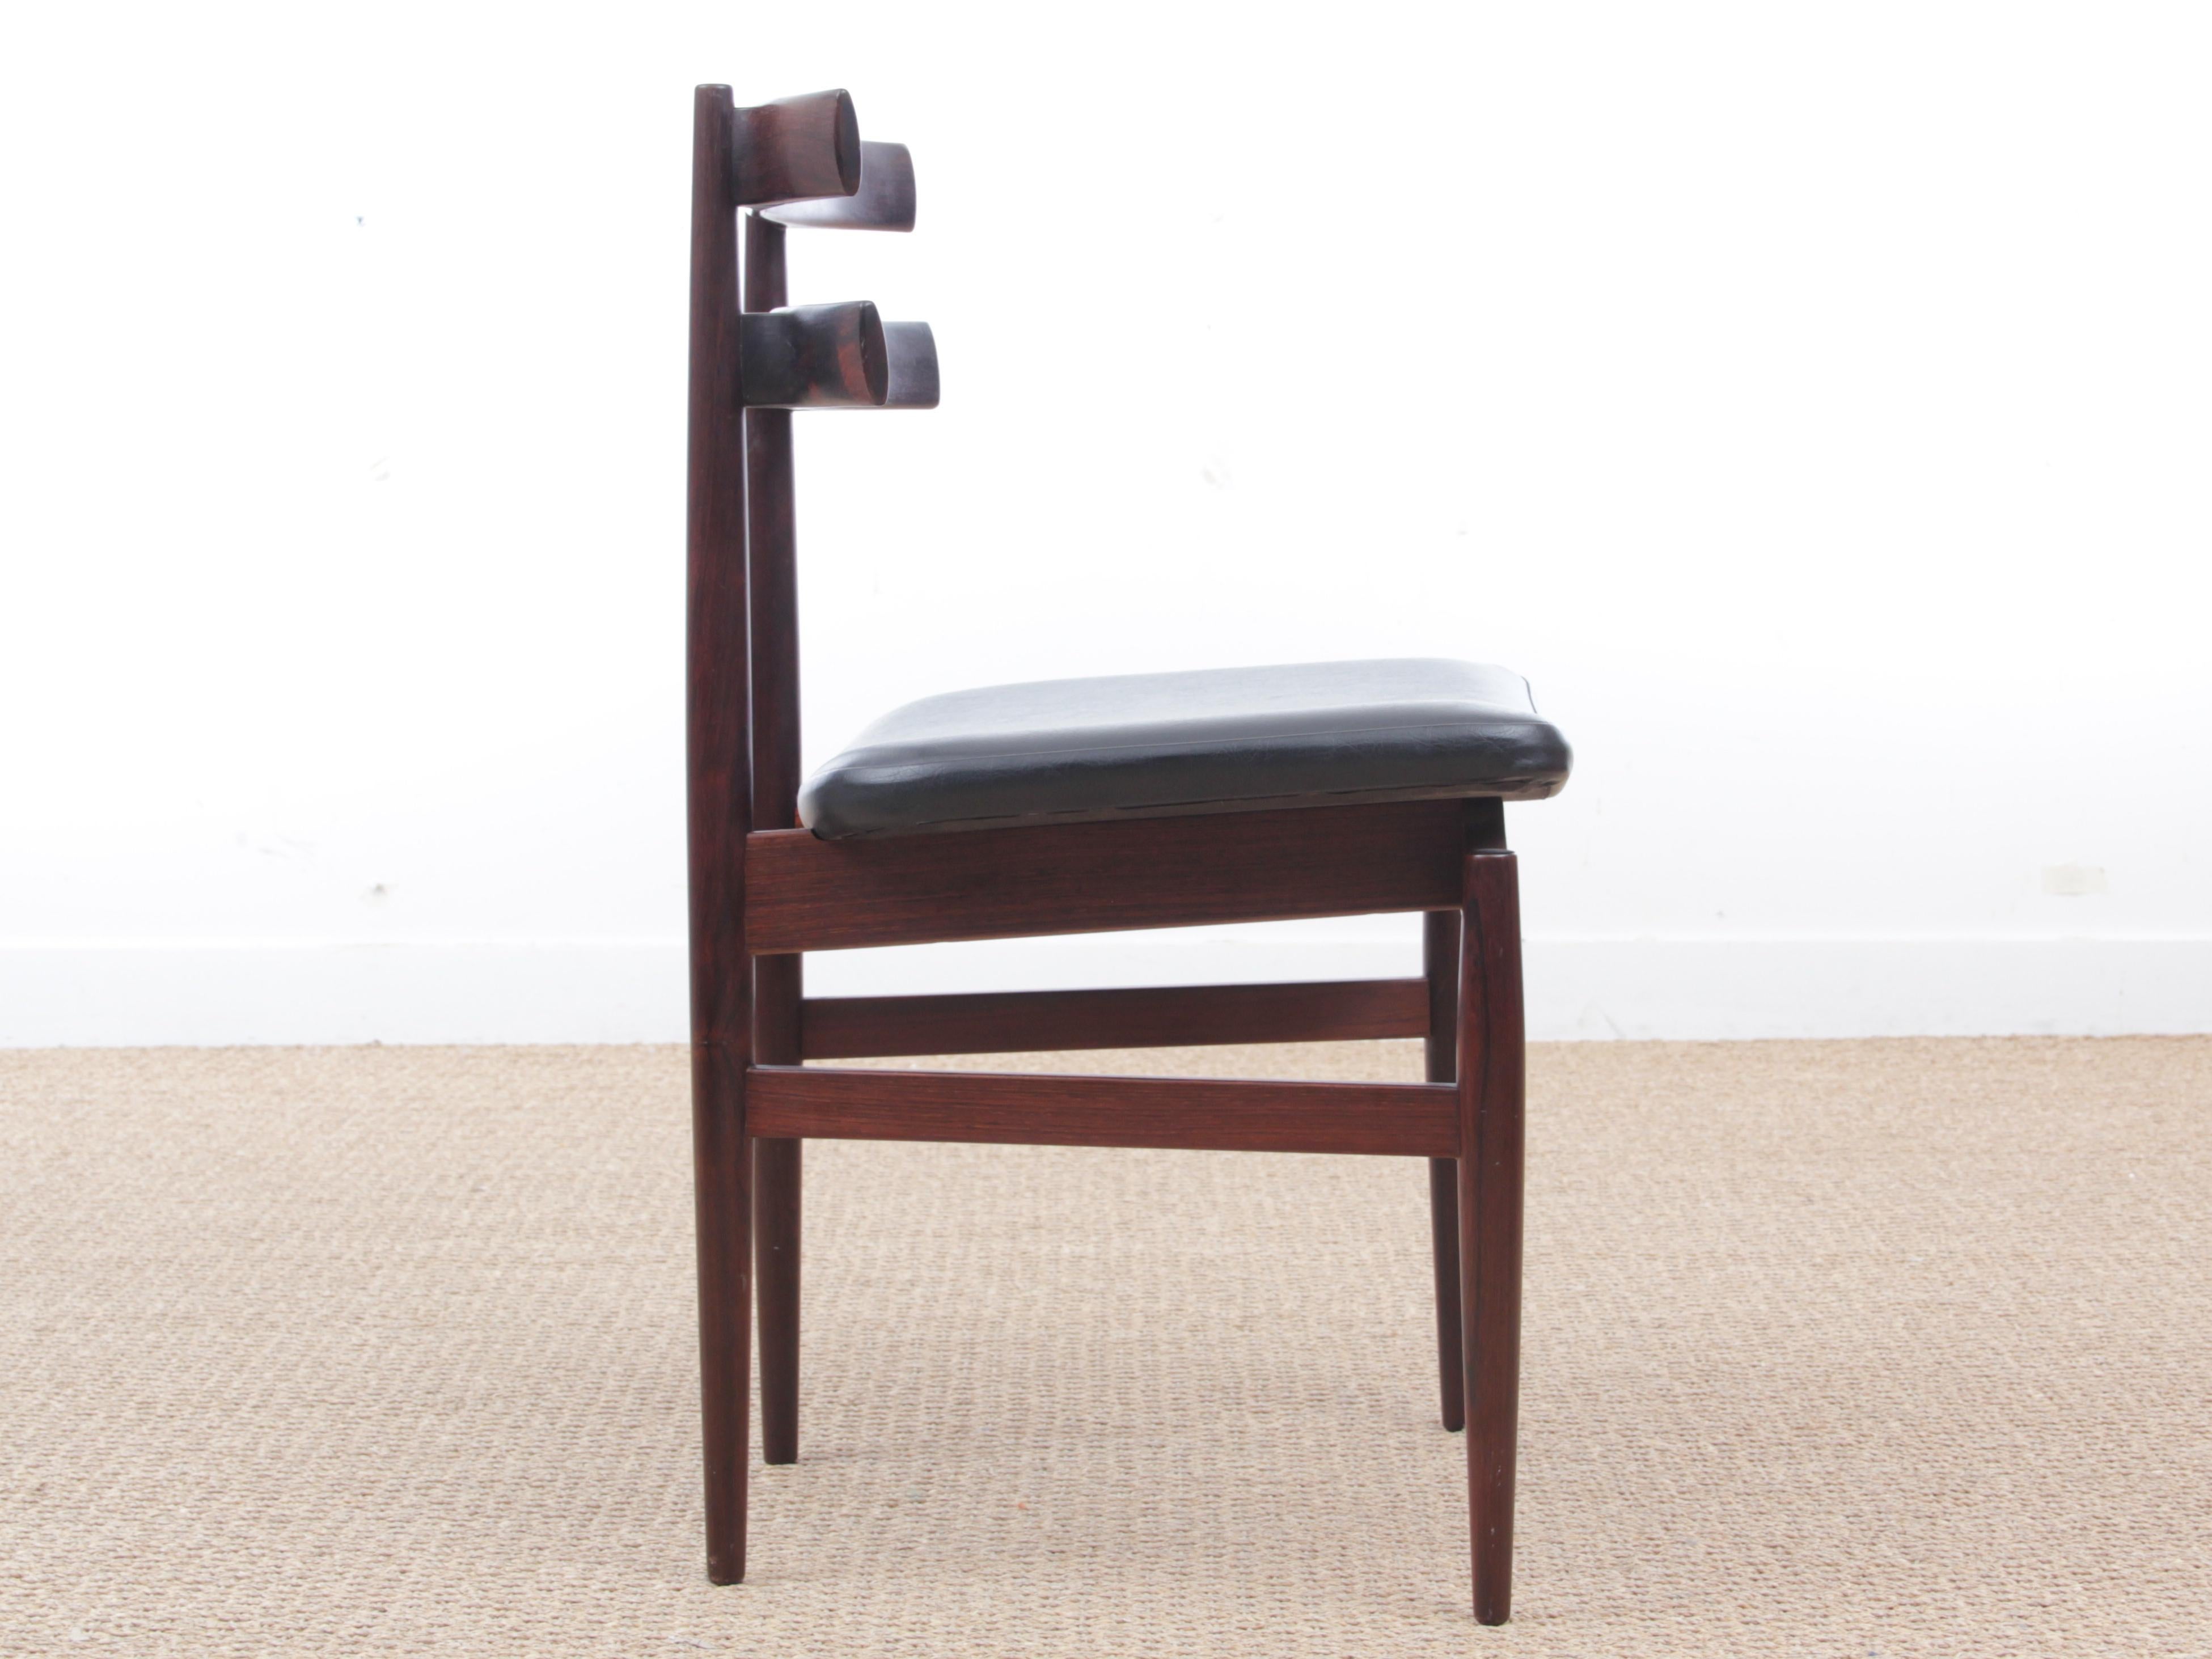 Scandinavian Mid-Century Modern Danish Set of Four Chairs in Rosewood by Poul Hundevad